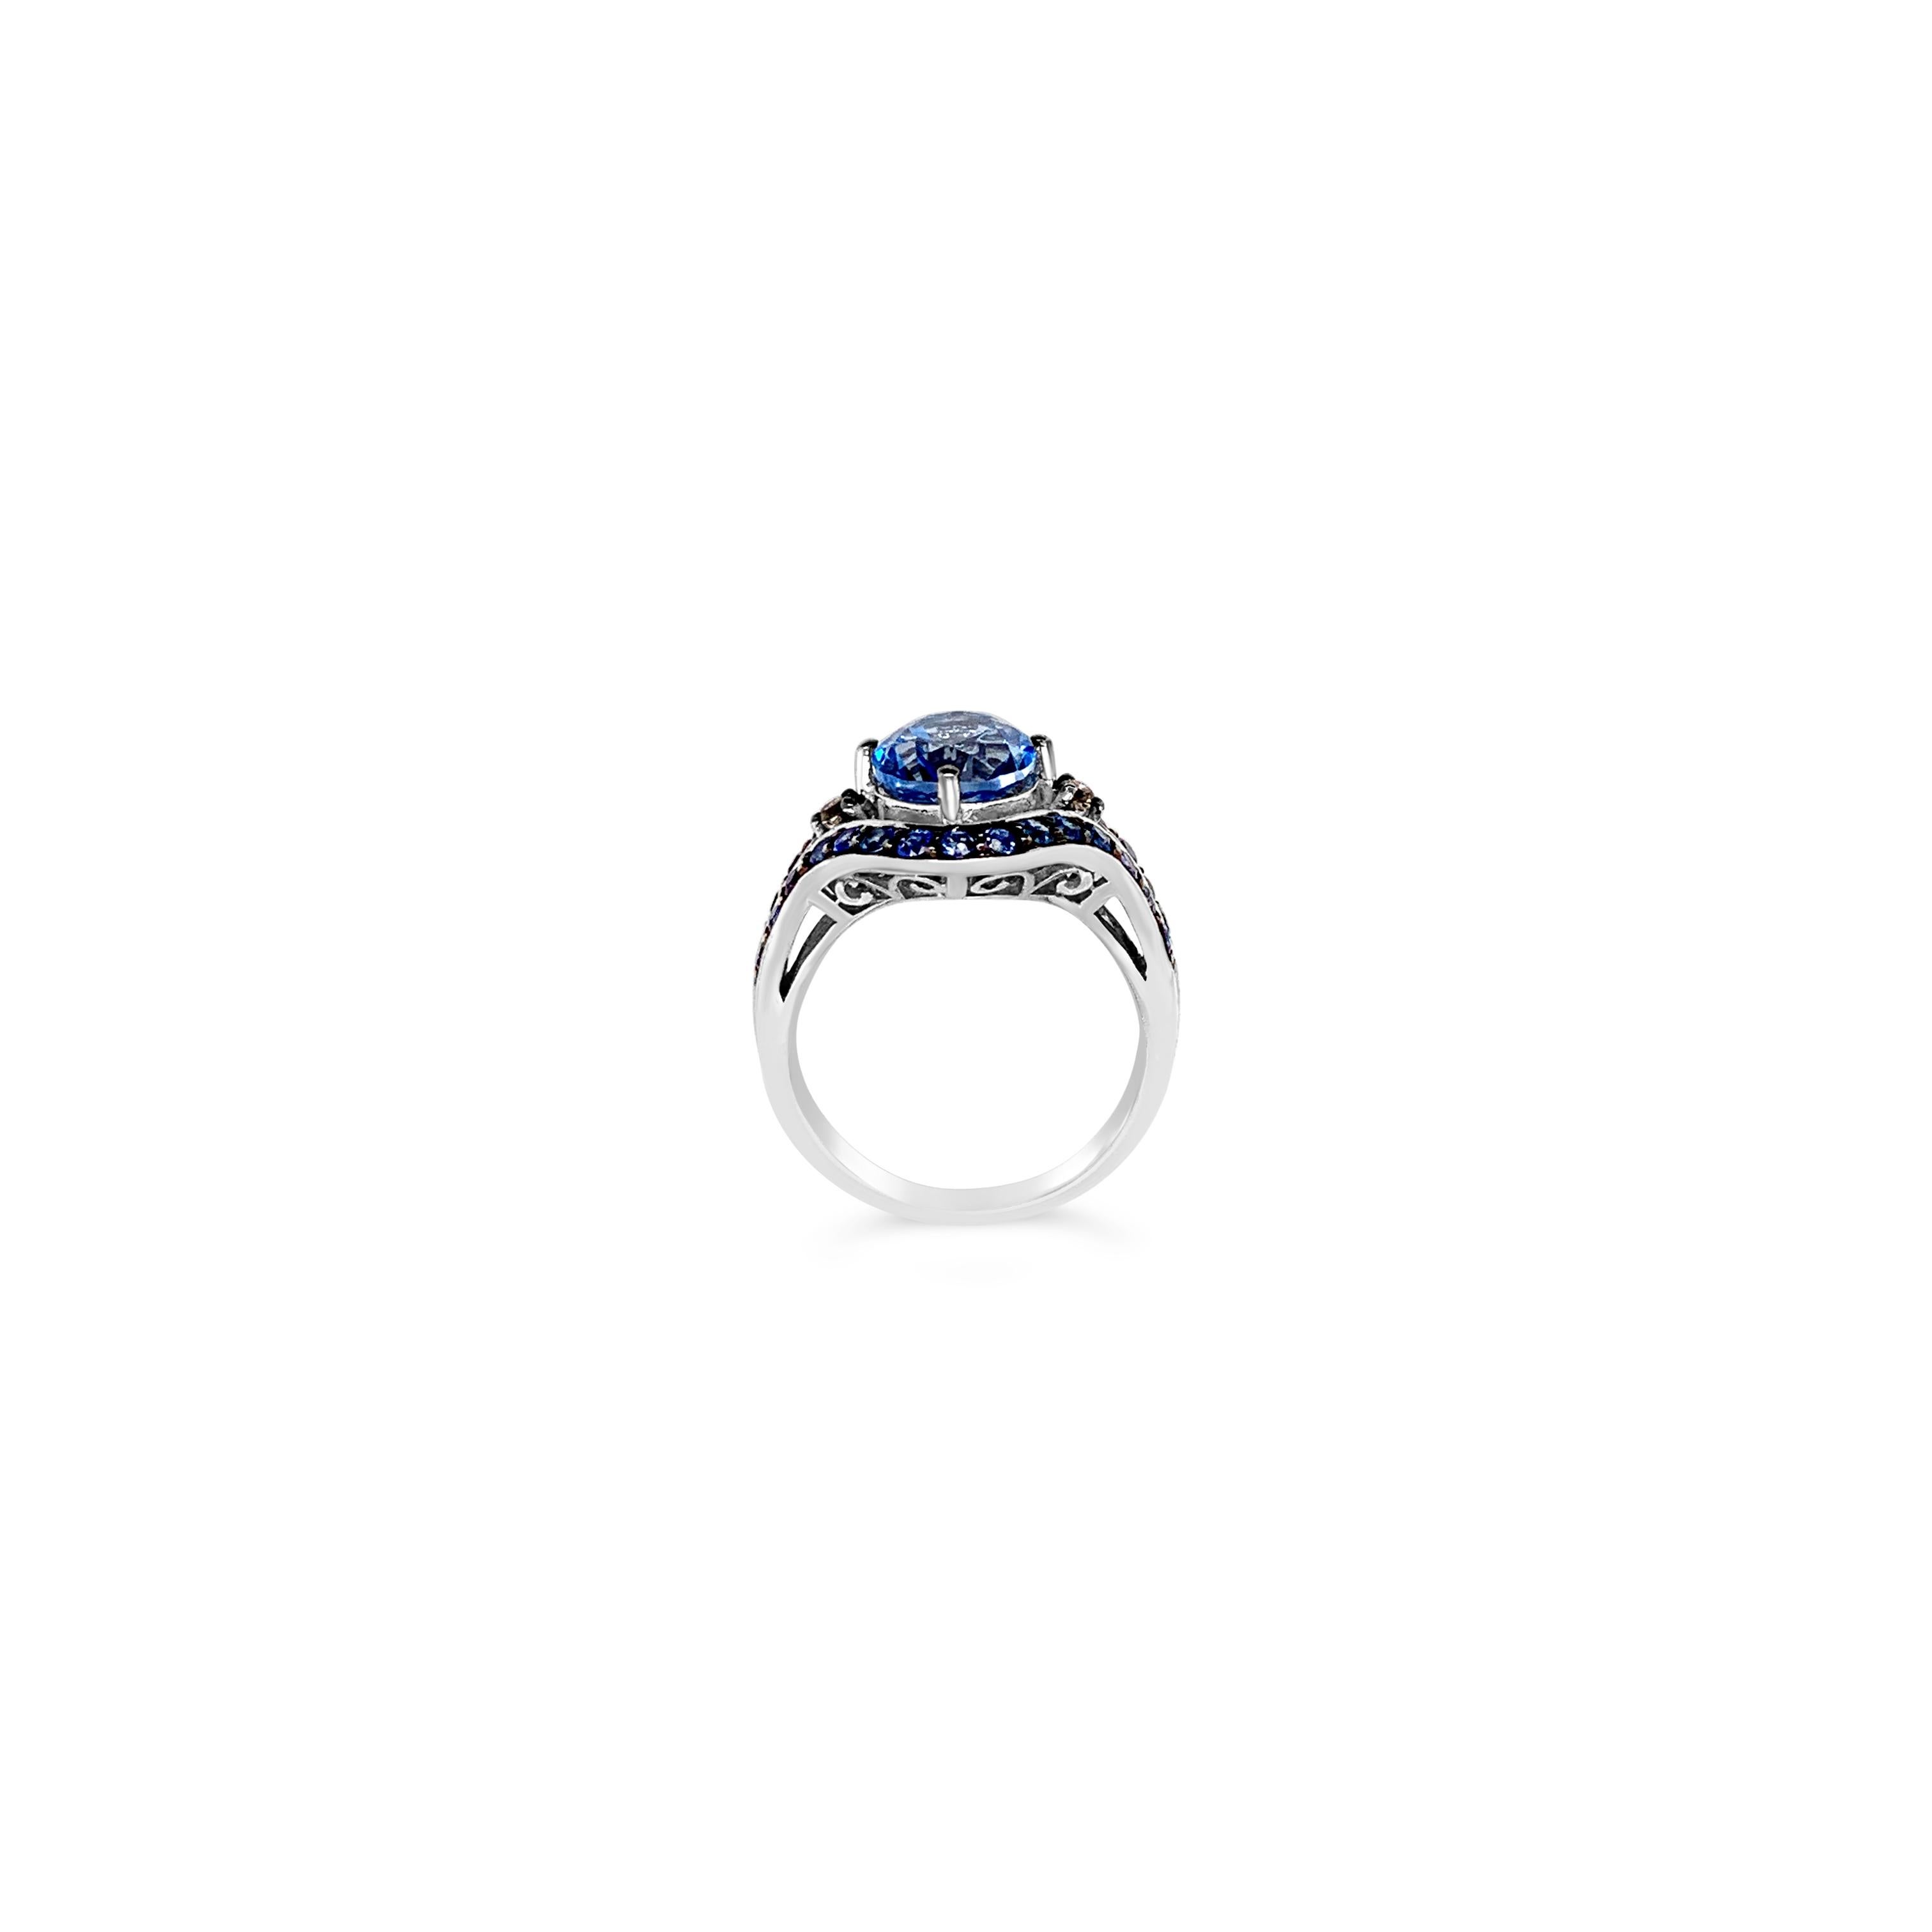 Gorgeous, Astonishing & Beautiful Le Vian Chocolatier® Ring featuring 2.80 cts. Ocean Blue Topaz™, 1.08 cts. Blueberry Sapphire™, 0.06 cts. Chocolate Diamonds®  set in 14K Vanilla Gold®
Ring size 6.75
Please feel free to reach out with any